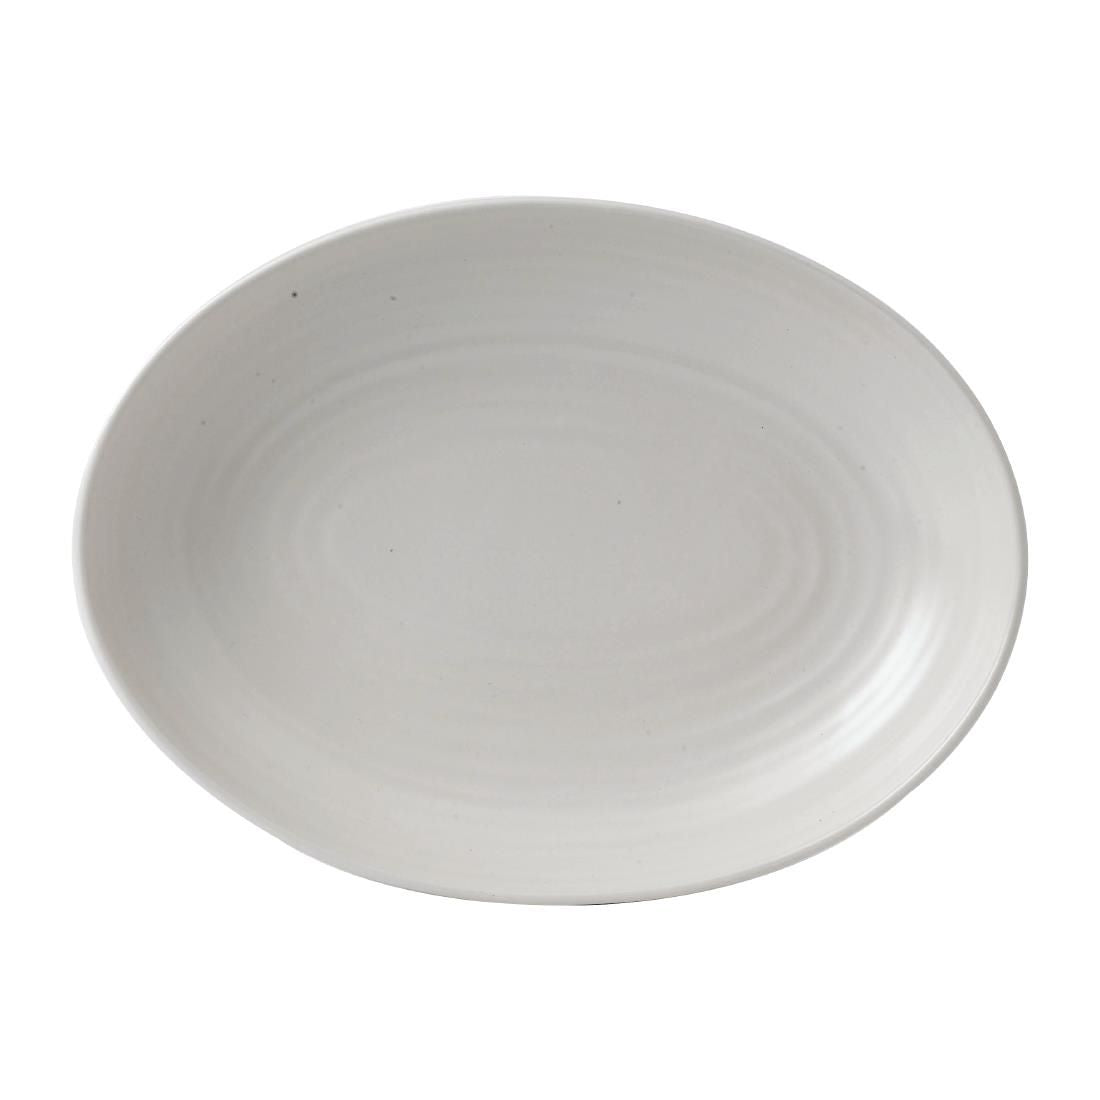 FE331 Dudson Evo Pearl Deep Oval Bowl 267 x 196mm (Pack of 6) JD Catering Equipment Solutions Ltd